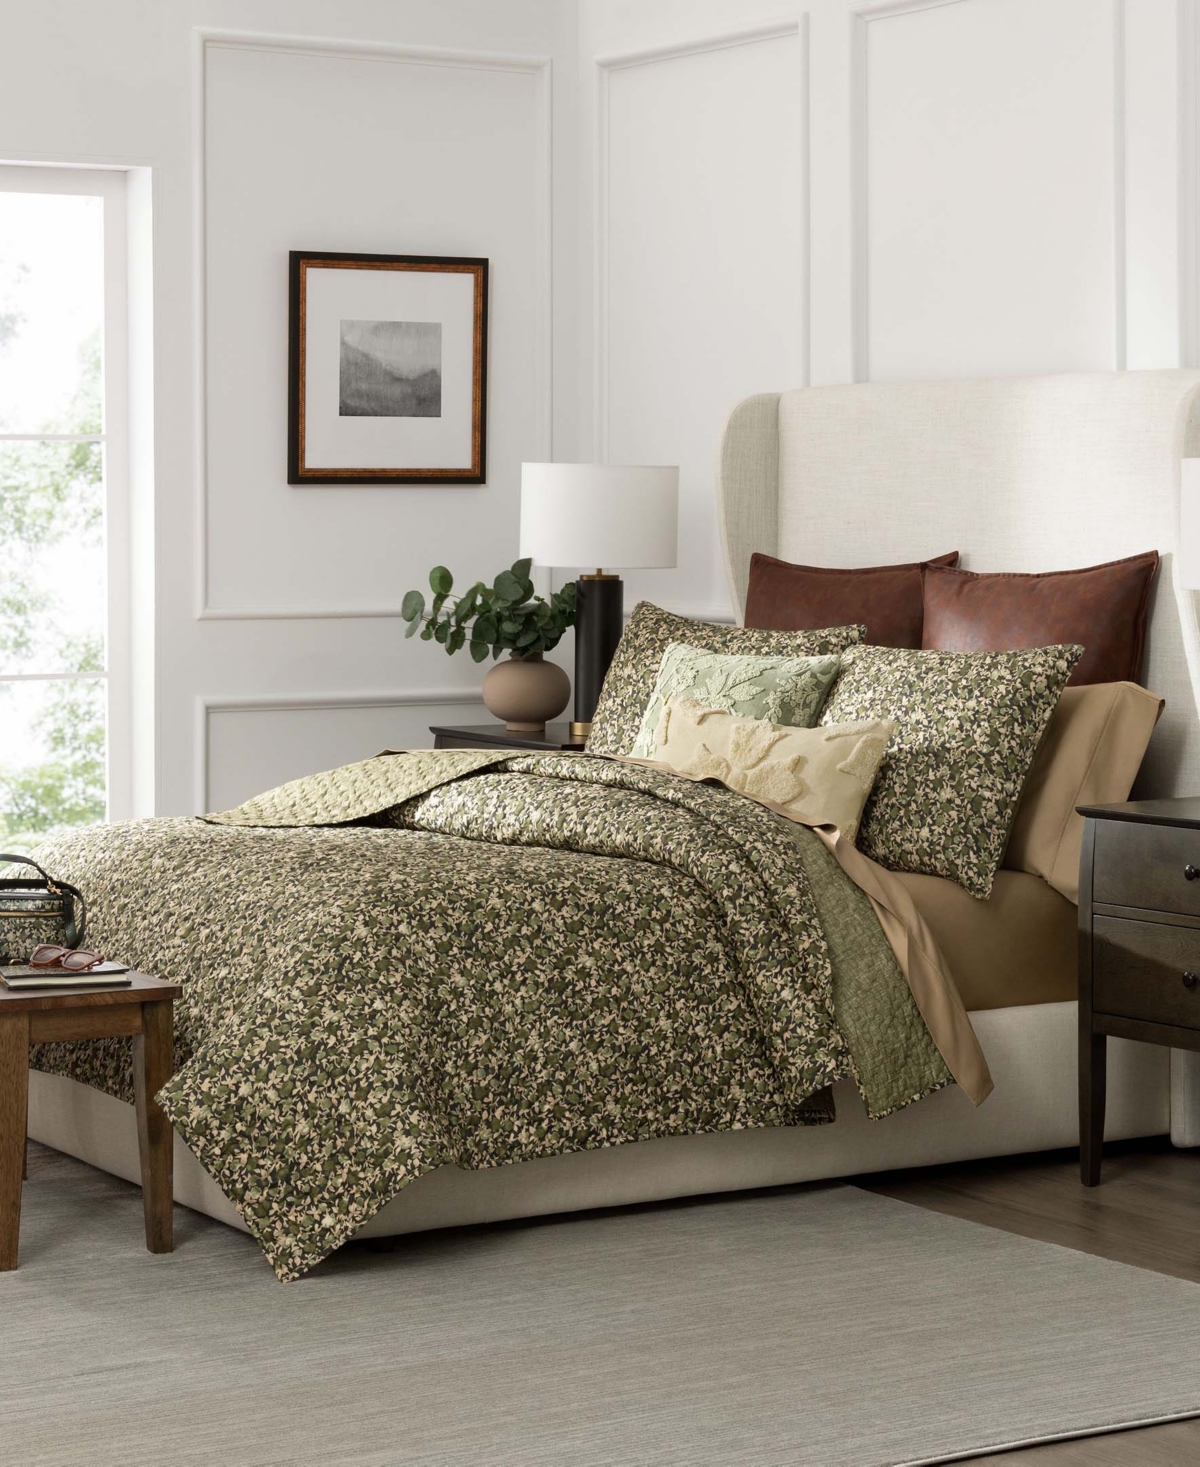 Patricia Nash Grove Quilt 3-pc. Set, Queen In Olive